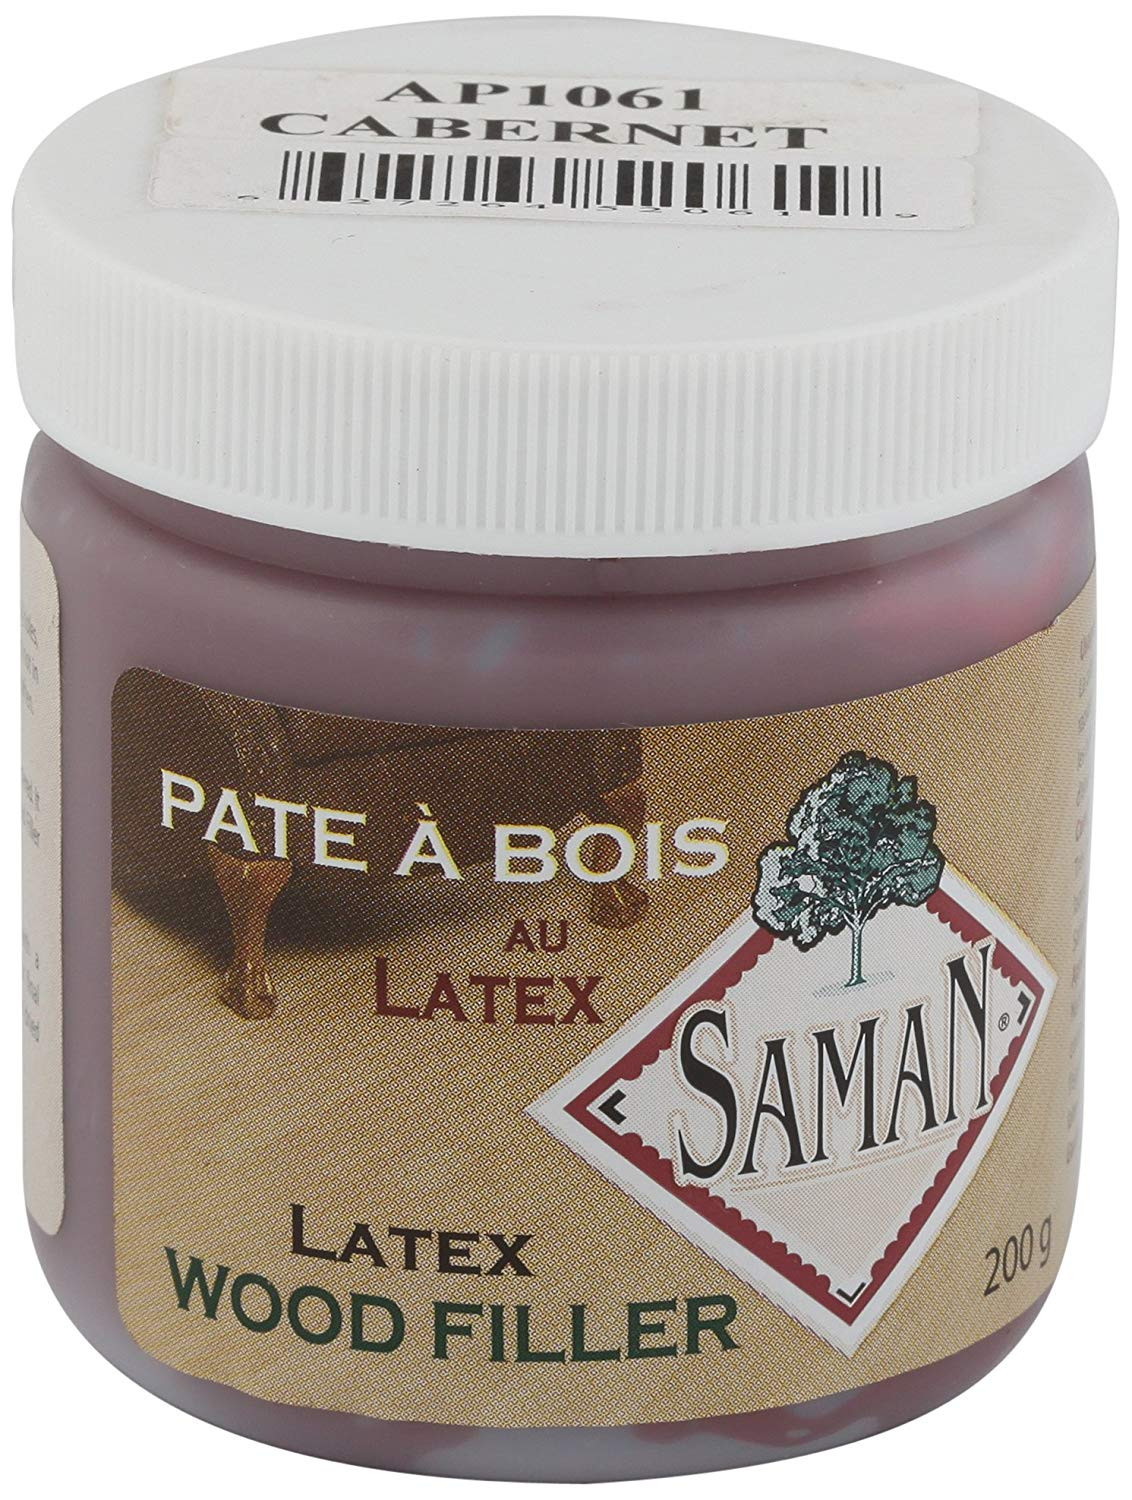 hardwood floor putty filler of saman ap 1061 200 7 ounce wood putty cabernet wall surface repair in saman ap 1061 200 7 ounce wood putty cabernet wall surface repair products amazon com